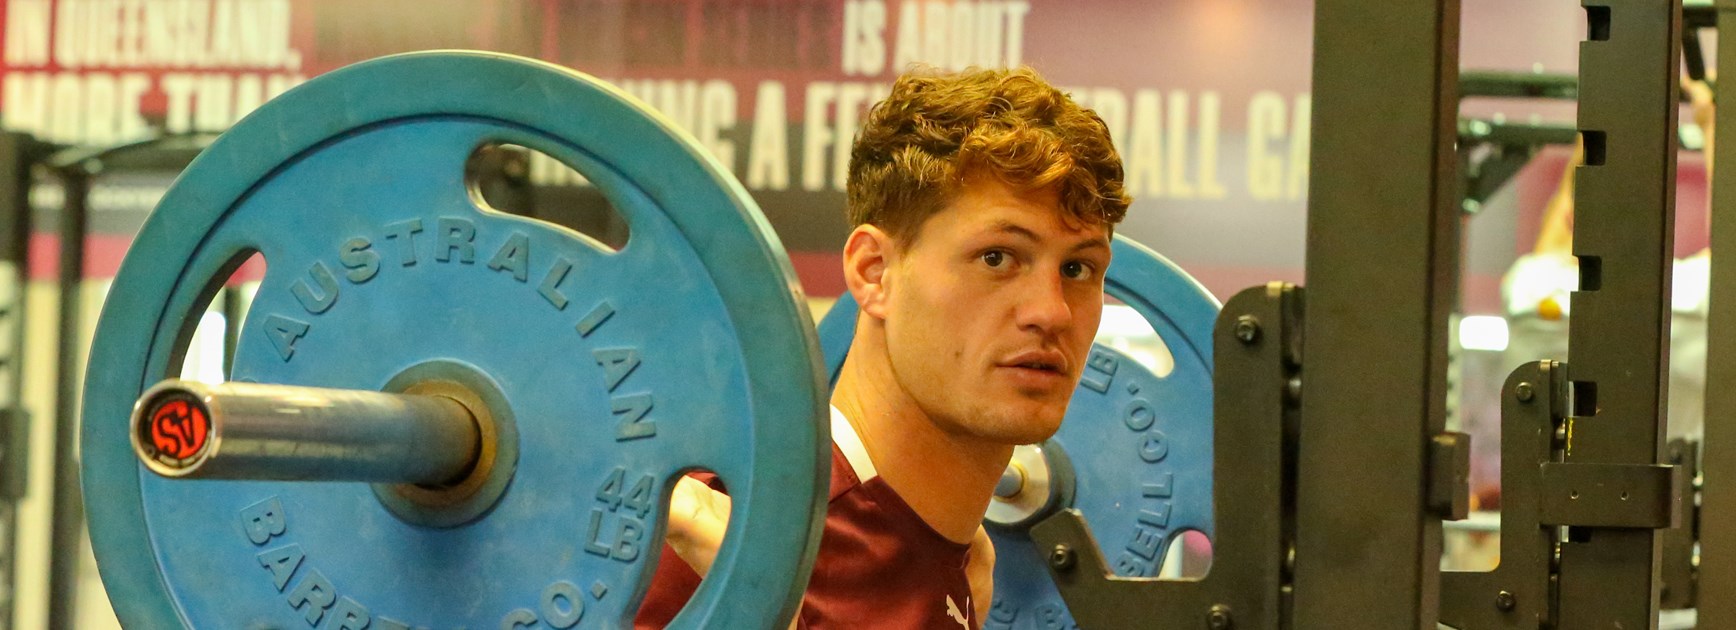 Ponga's Origin mission: I want to be known as a winner